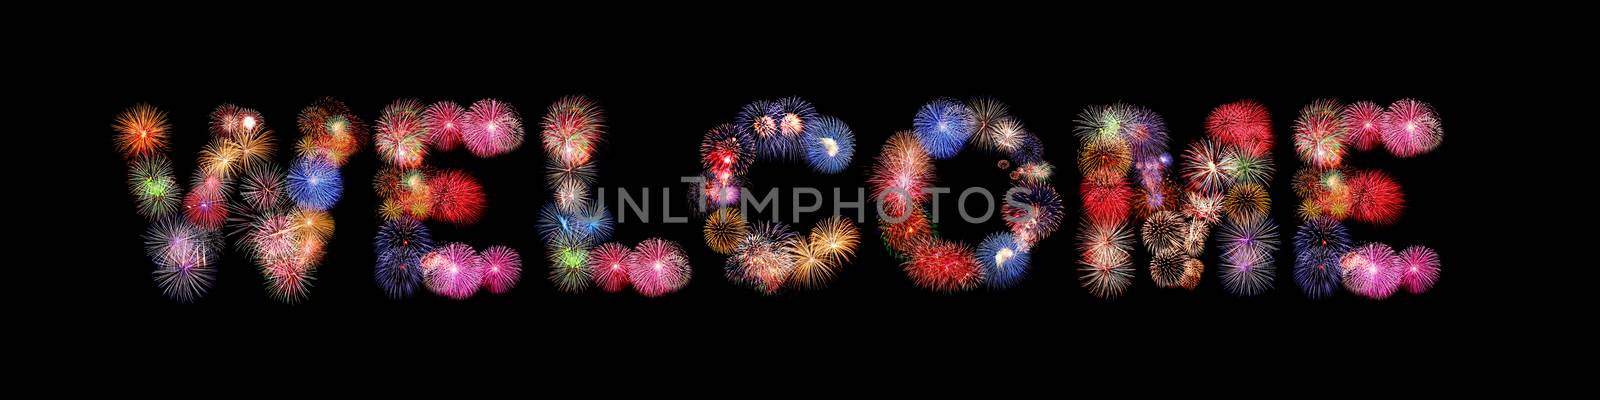 Welcome word colorful fireworks text isolated on black background